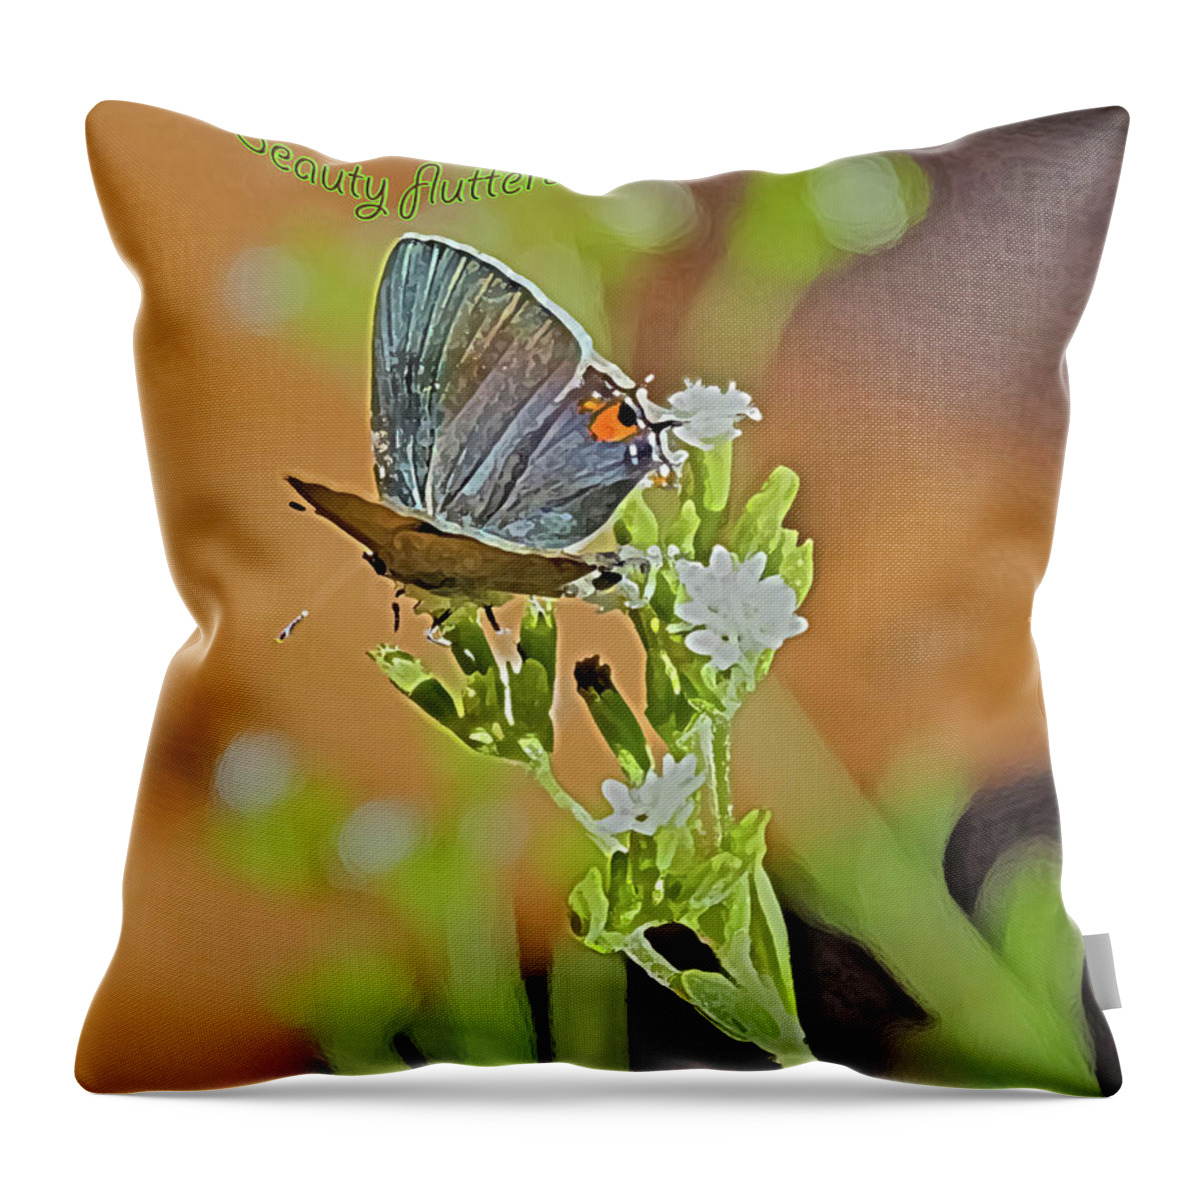 Beauty Throw Pillow featuring the photograph Beauty Flutters By by Barbara Dean